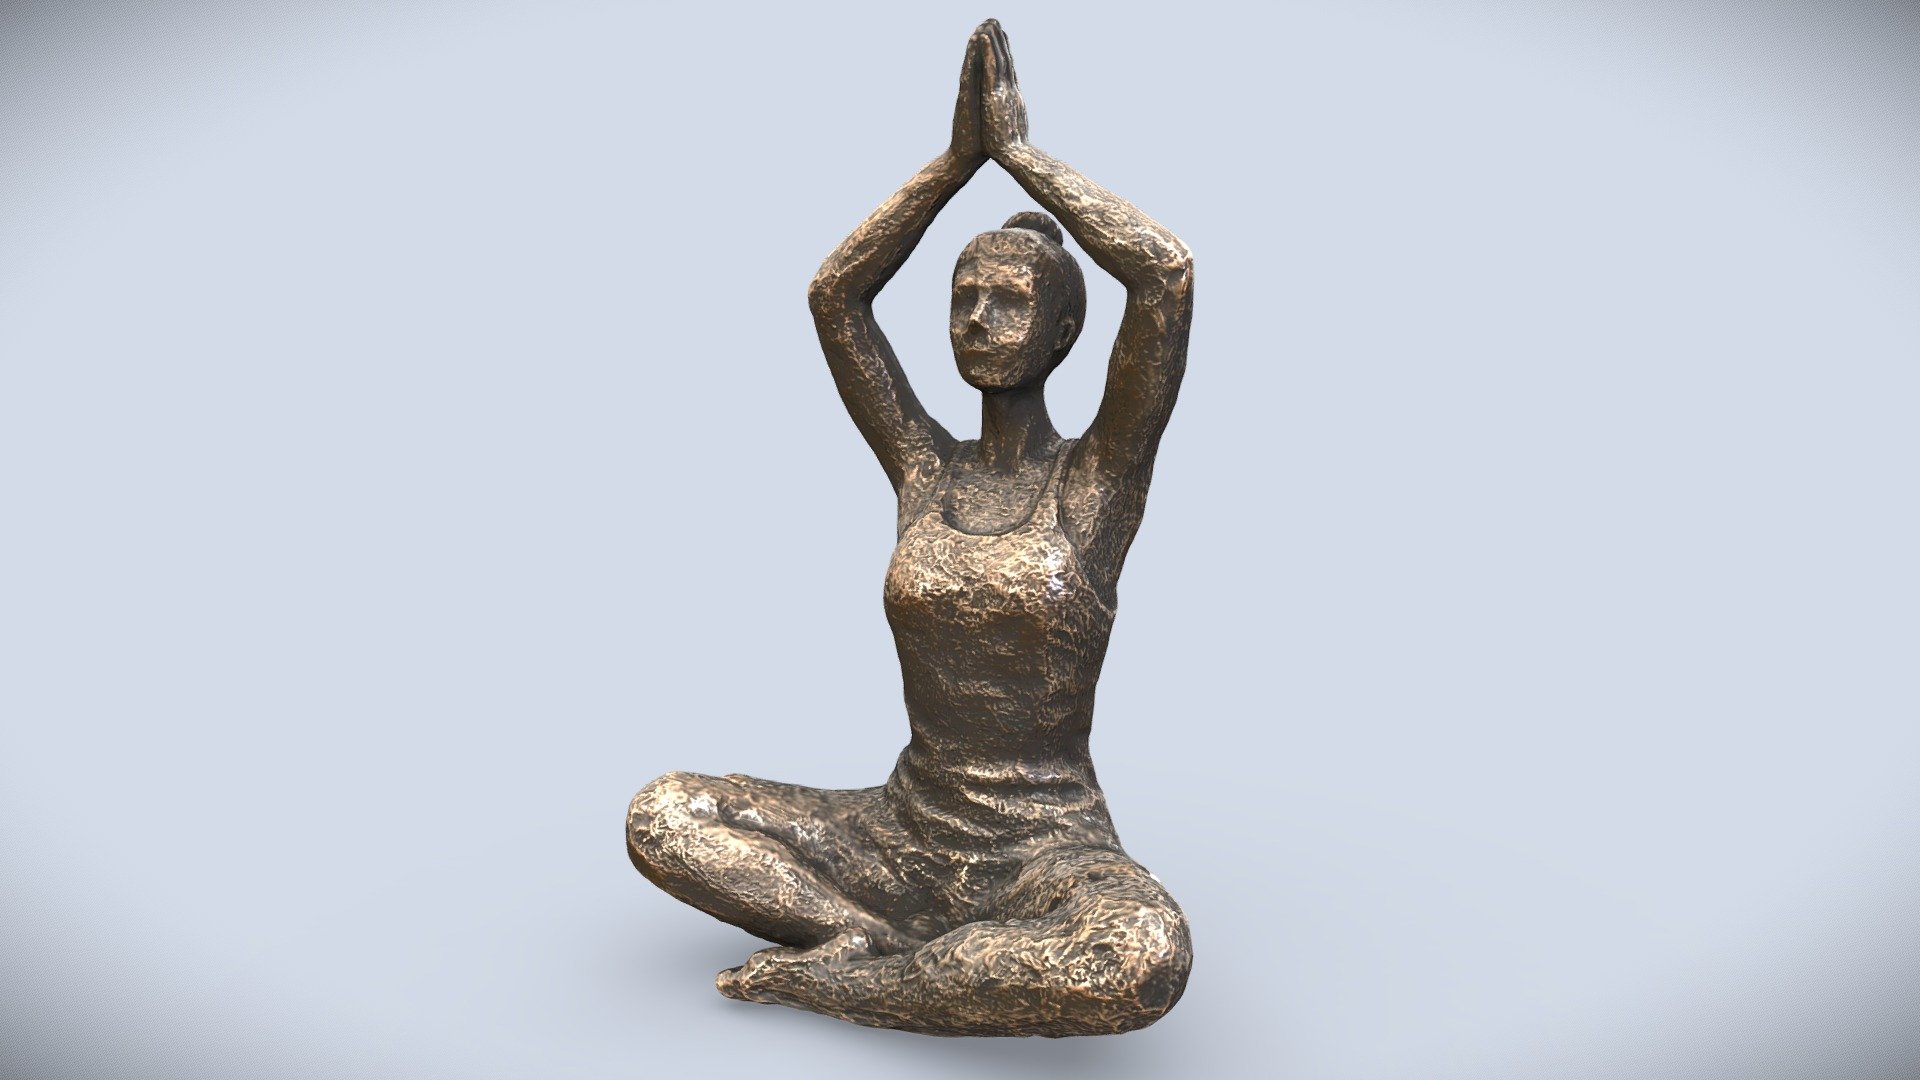 Scan of a golden bronze yoga pose figurine. This decorative figure is sitting in a lotus pose with arms up above the head.

Images of this prop were taken in a neutral lighting environment which does not produce hard shadows - feel free to spin the light around to see how it reacts to the light.

8K diffuse, spec and ambient occlusion textures.

Enjoy!

Alternative yoga figurie pose with arms down can be found at:

https://sketchfab.com/3d-models/yoga-figurine-lotus-pose-hands-at-chest-level-3469022162e84d21b26bbc969476430d - Yoga Figurine - Lotus Arms Up Pose - Buy Royalty Free 3D model by waitism 3d model